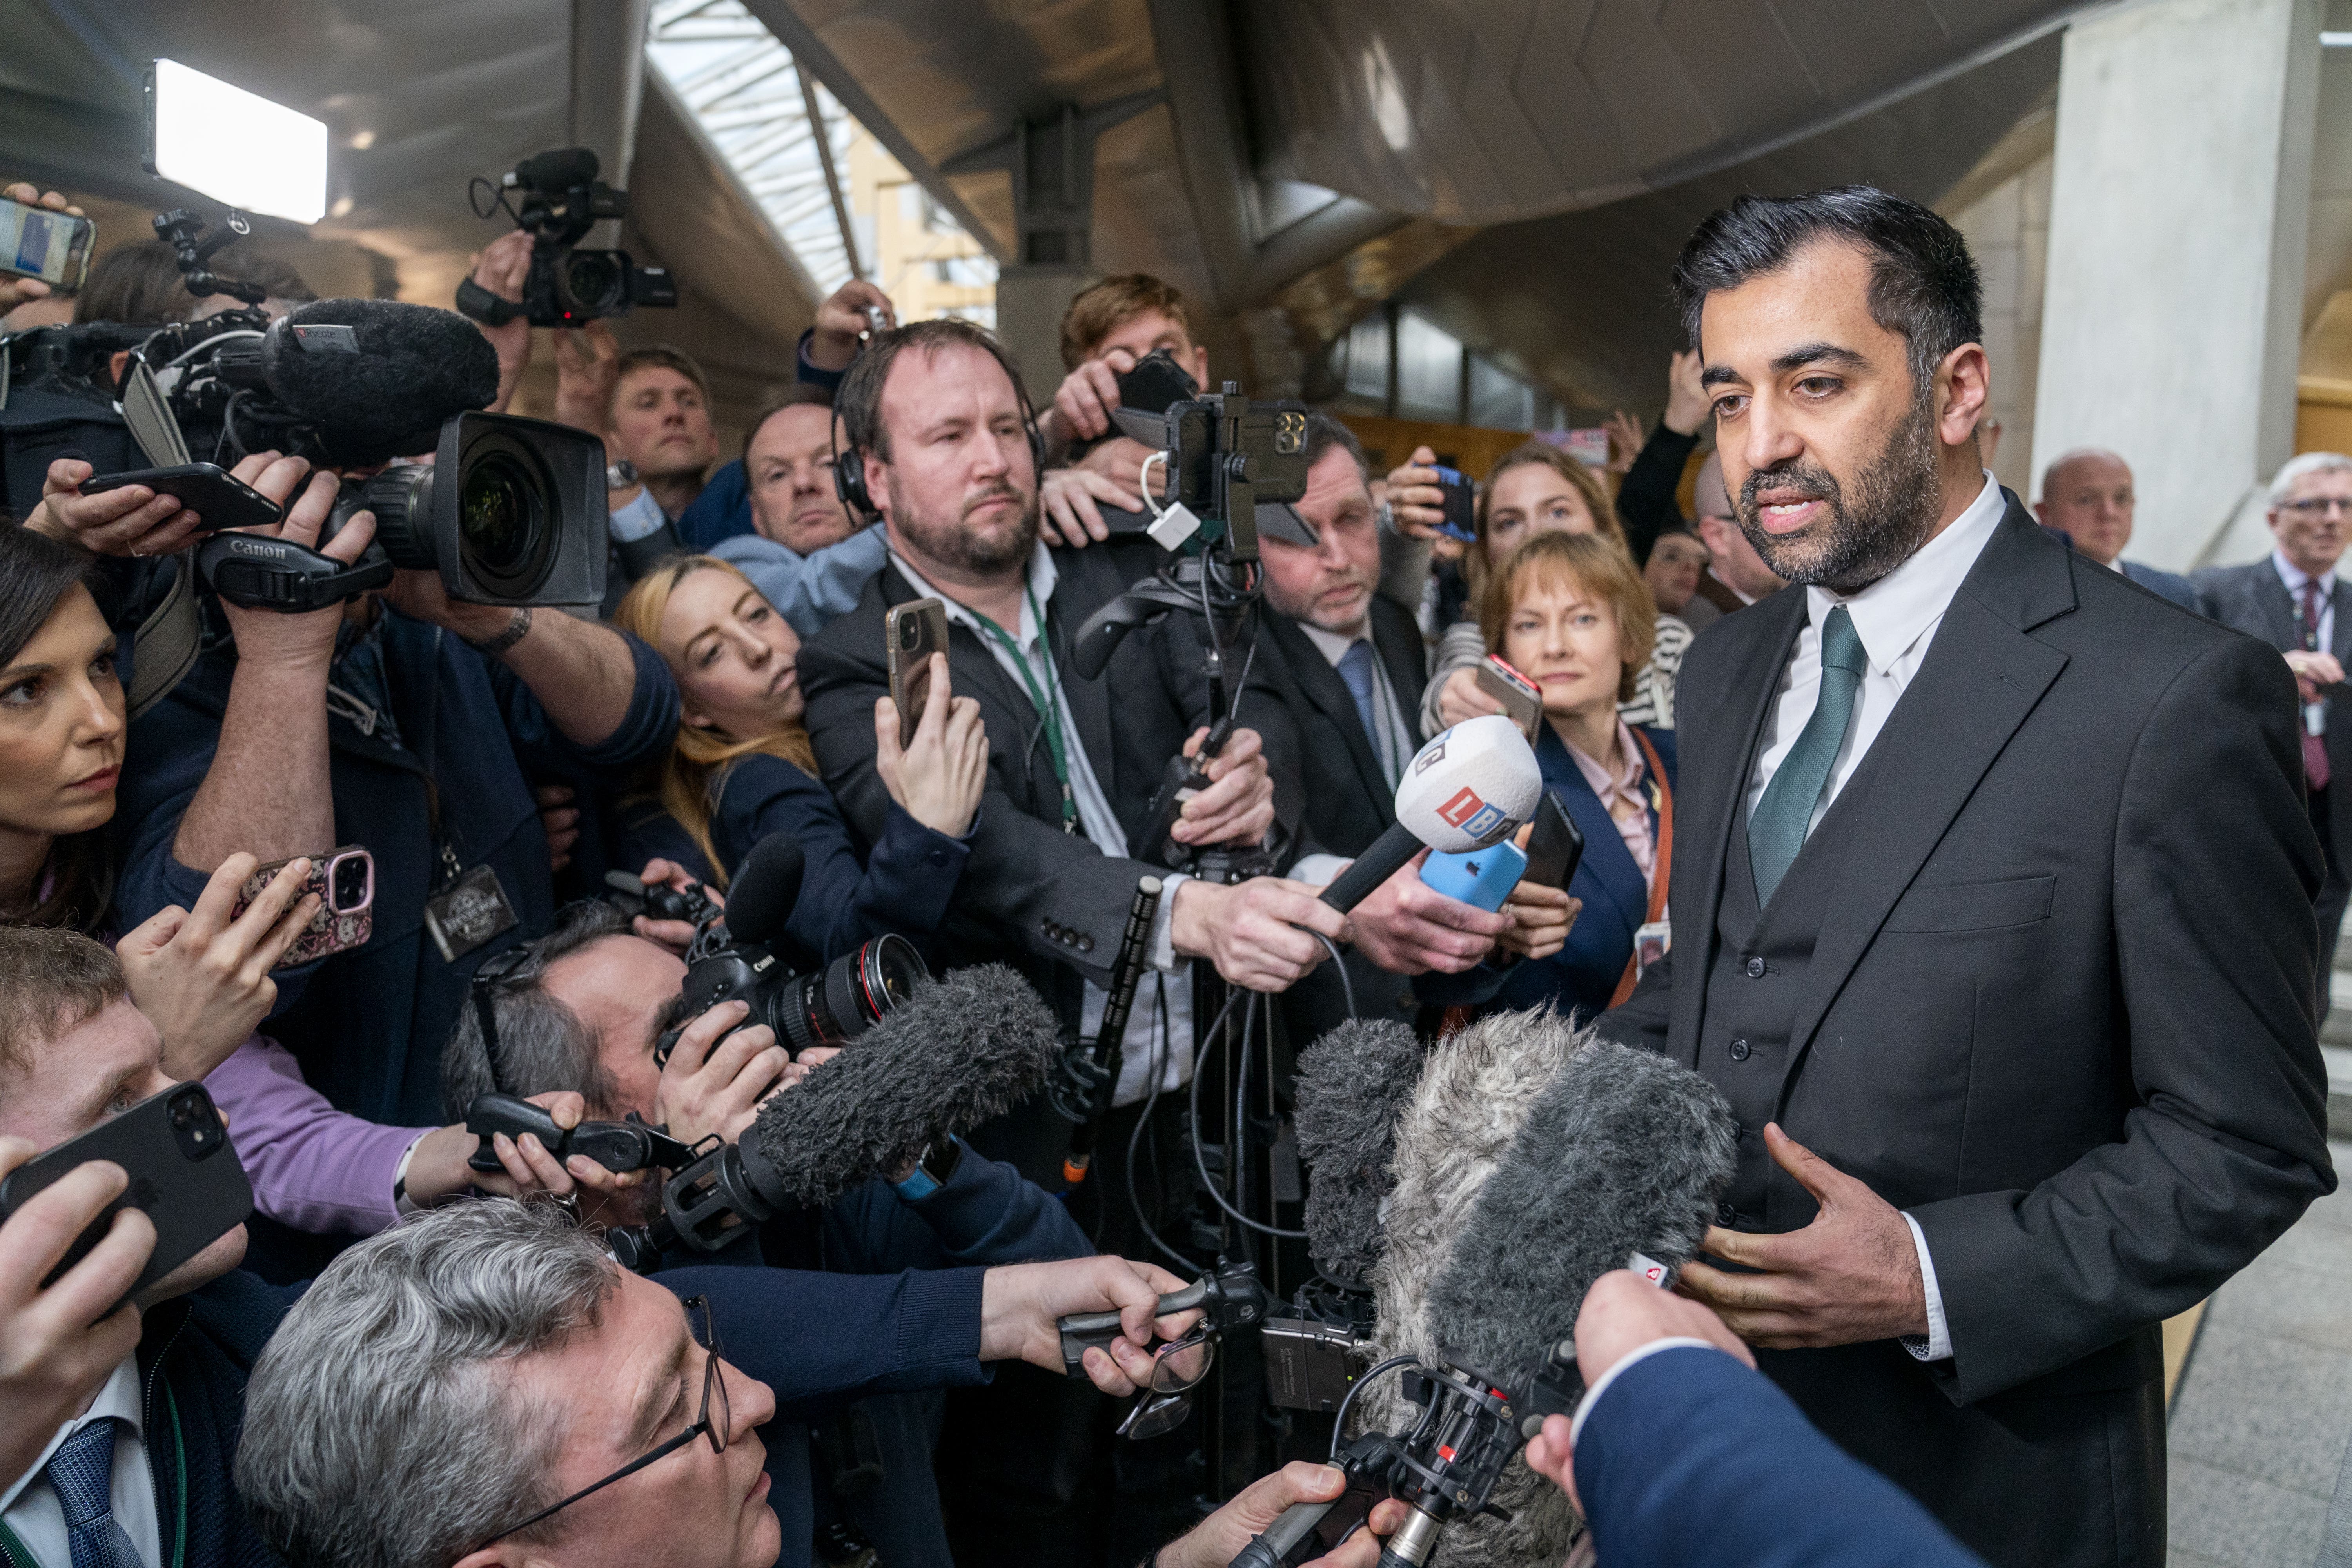 Humza Yousaf vowed to argue ‘tirelessly’ for Scottish independence in his first speech after becoming Scotland’s new First Minister (Jane Barlow/PA)